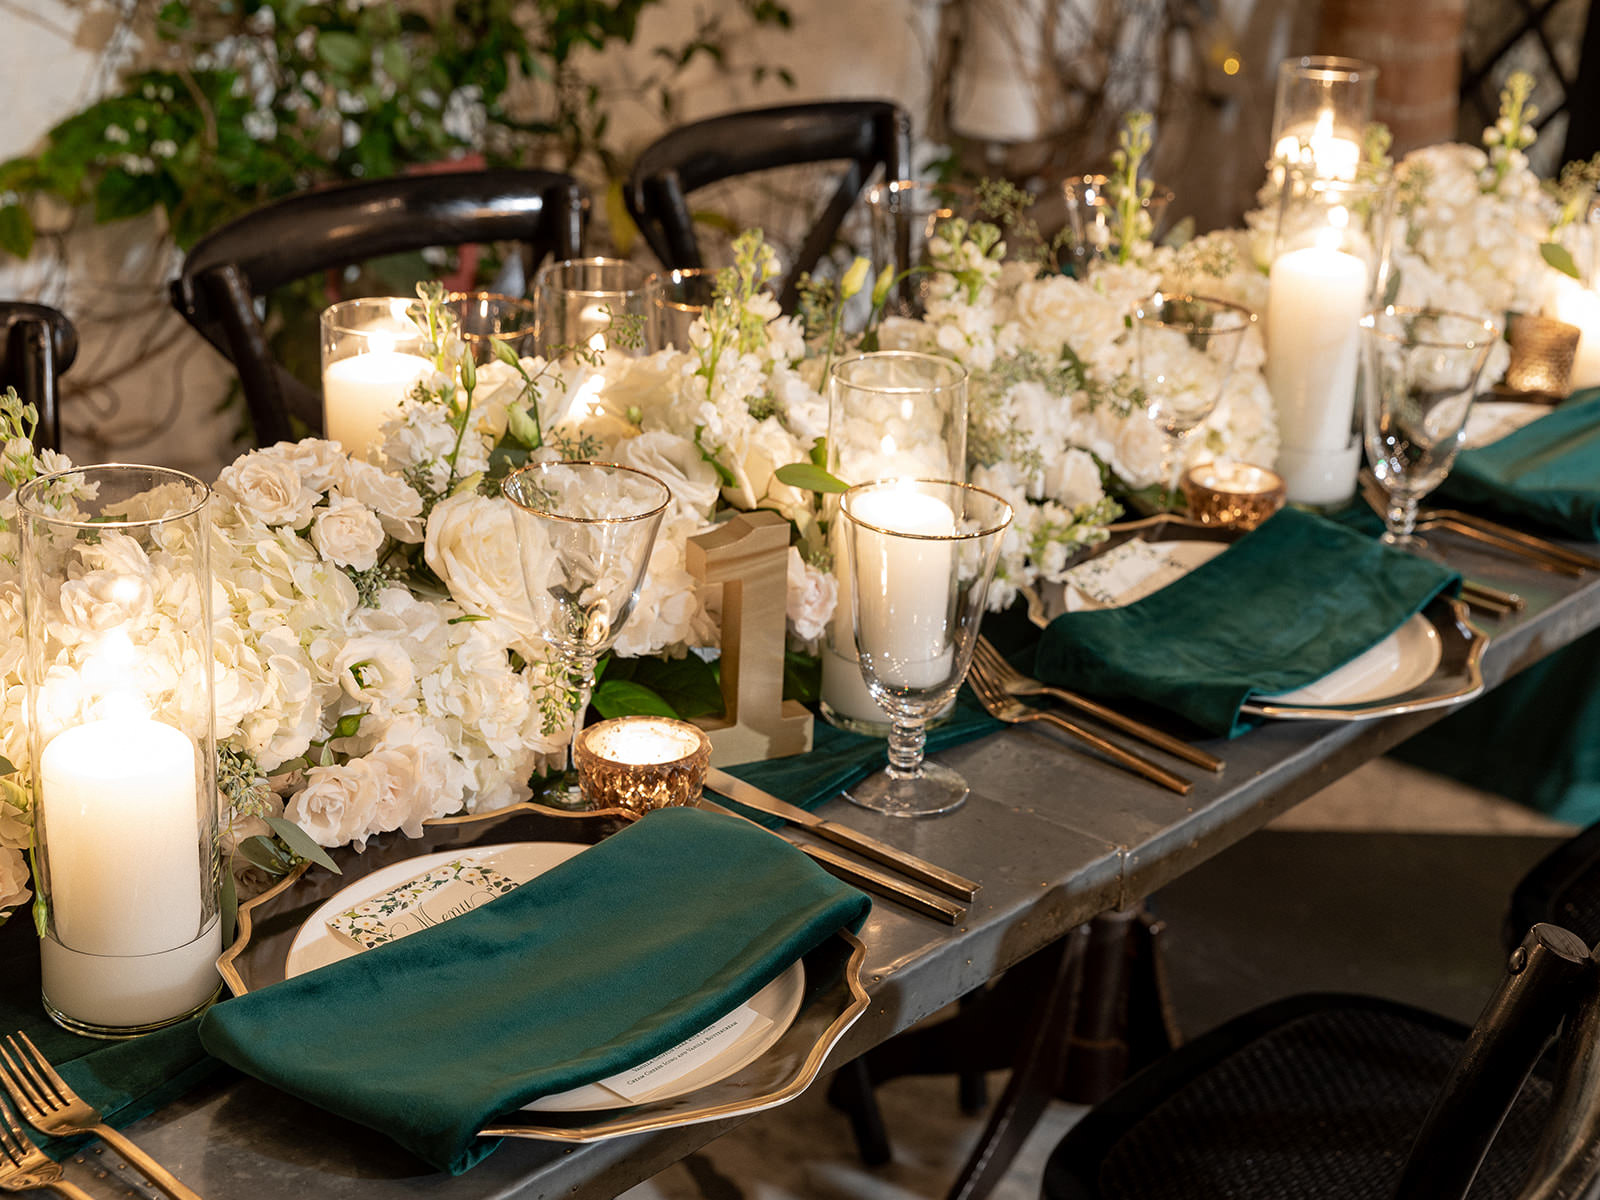 Classic Elegant Wedding Reception Decor, Gold Rimmed Scalloped Chargers, Emerald Green Linen Napkins, Lush White Roses and Hydrangeas Floral Table Runner, Candles, Gold Flatware | Tampa Bay Wedding Florist Botanica | A Chair Affair Rentals